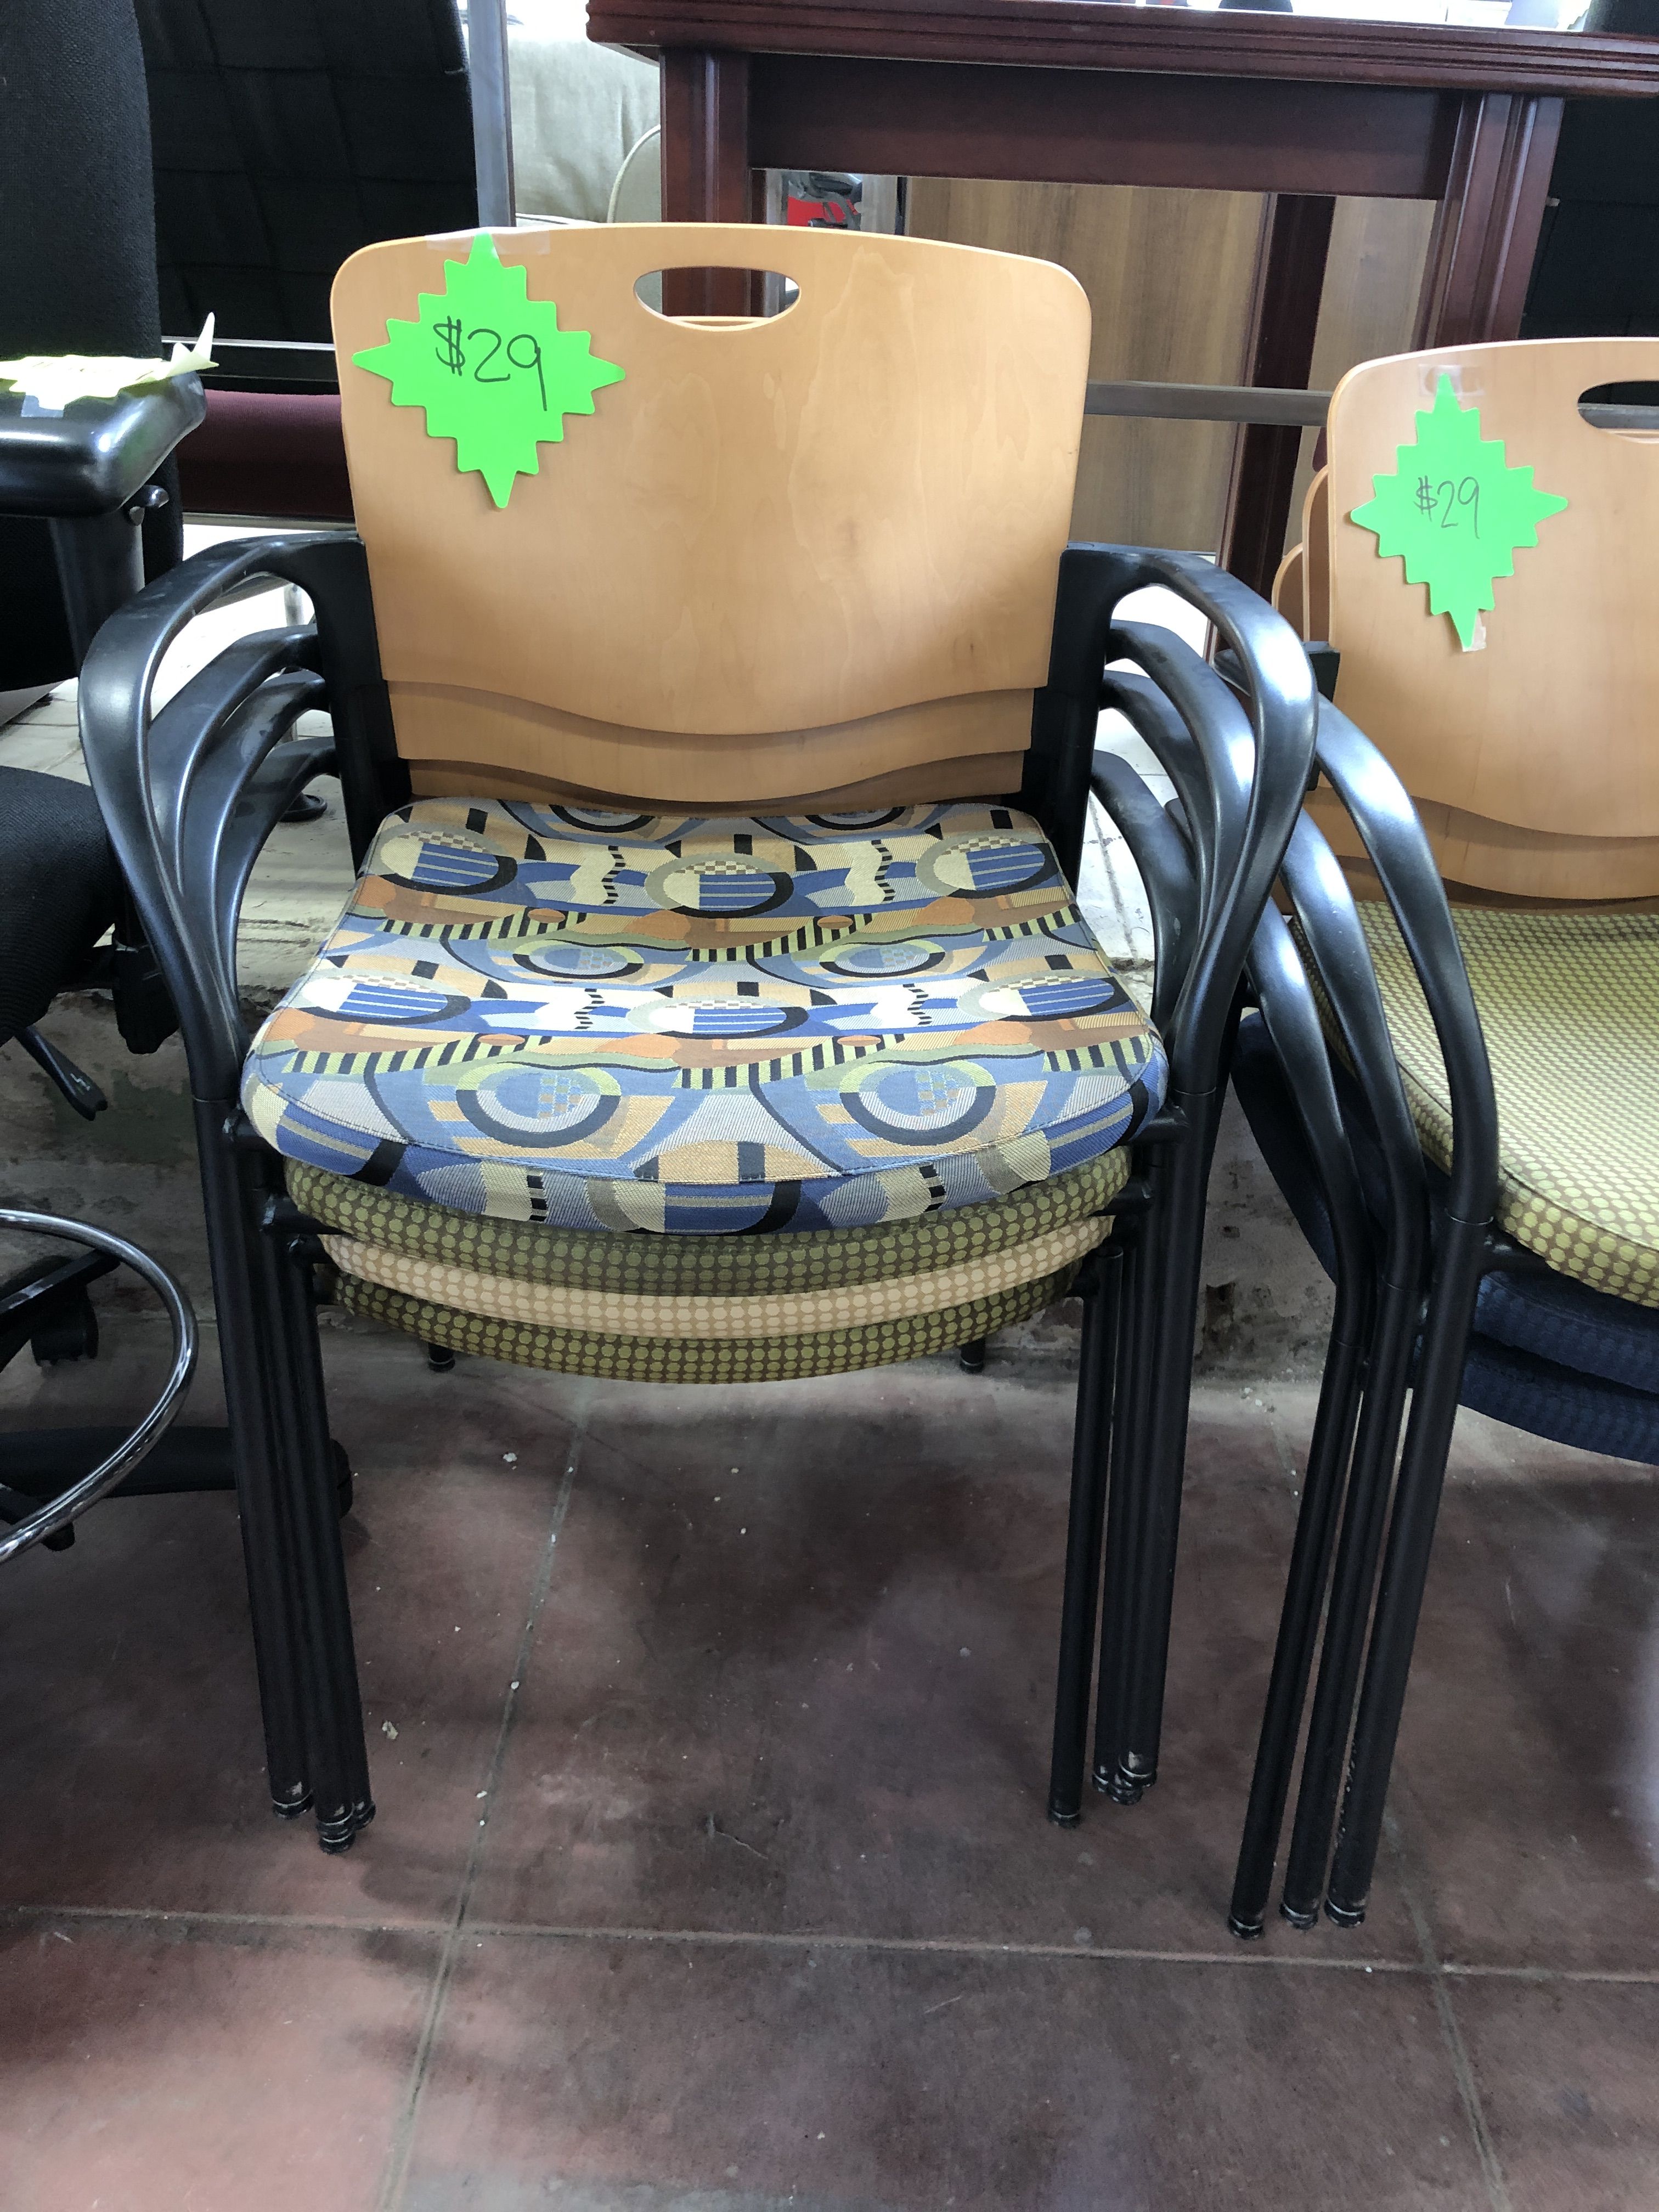 Used Stacking/Wood/Upholstered Office Side Chairs $29ea.